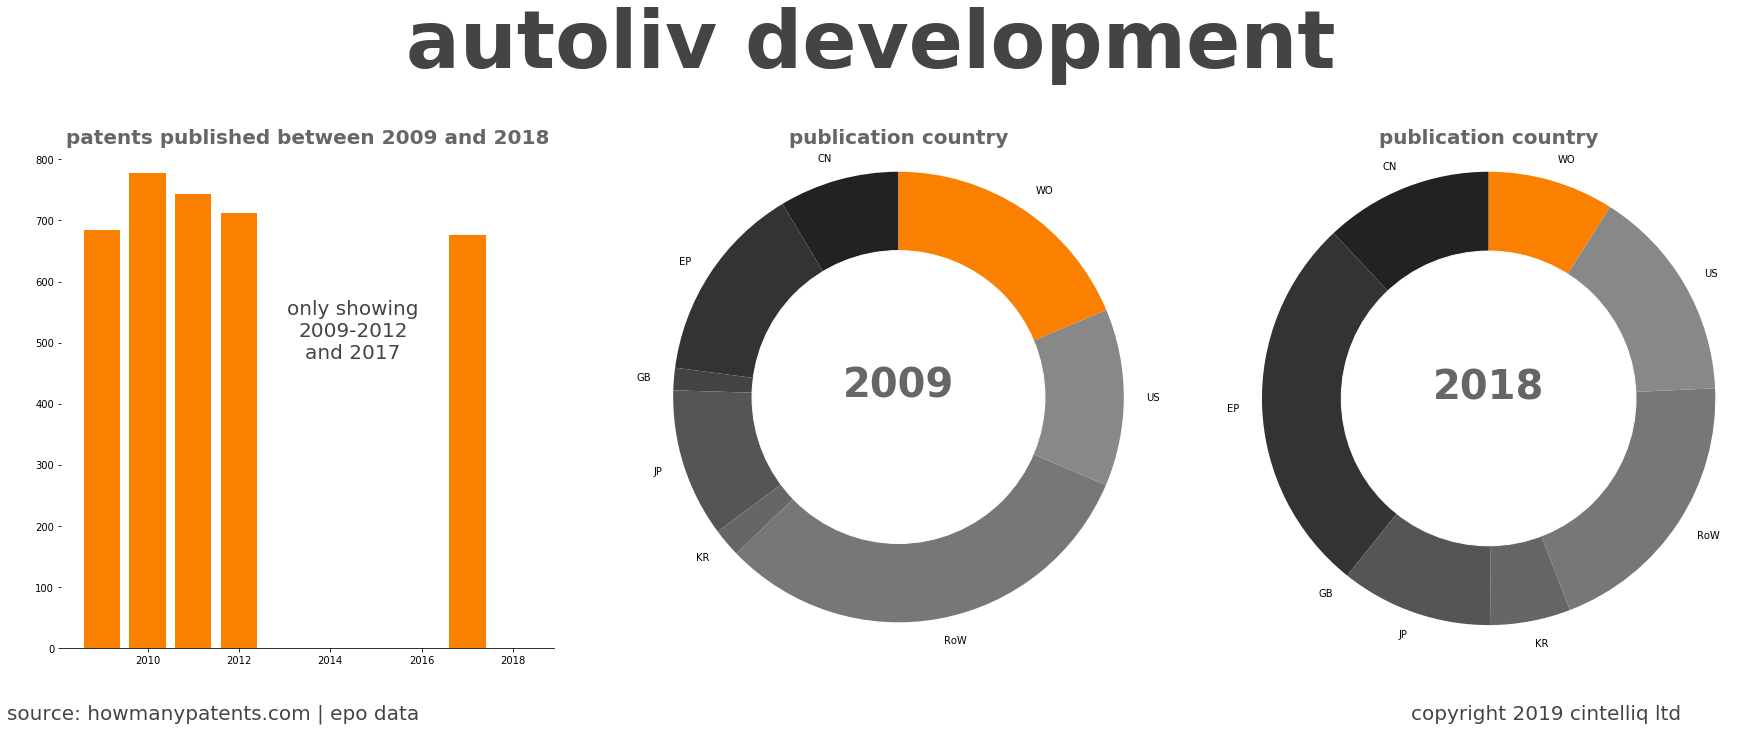 summary of patents for Autoliv Development